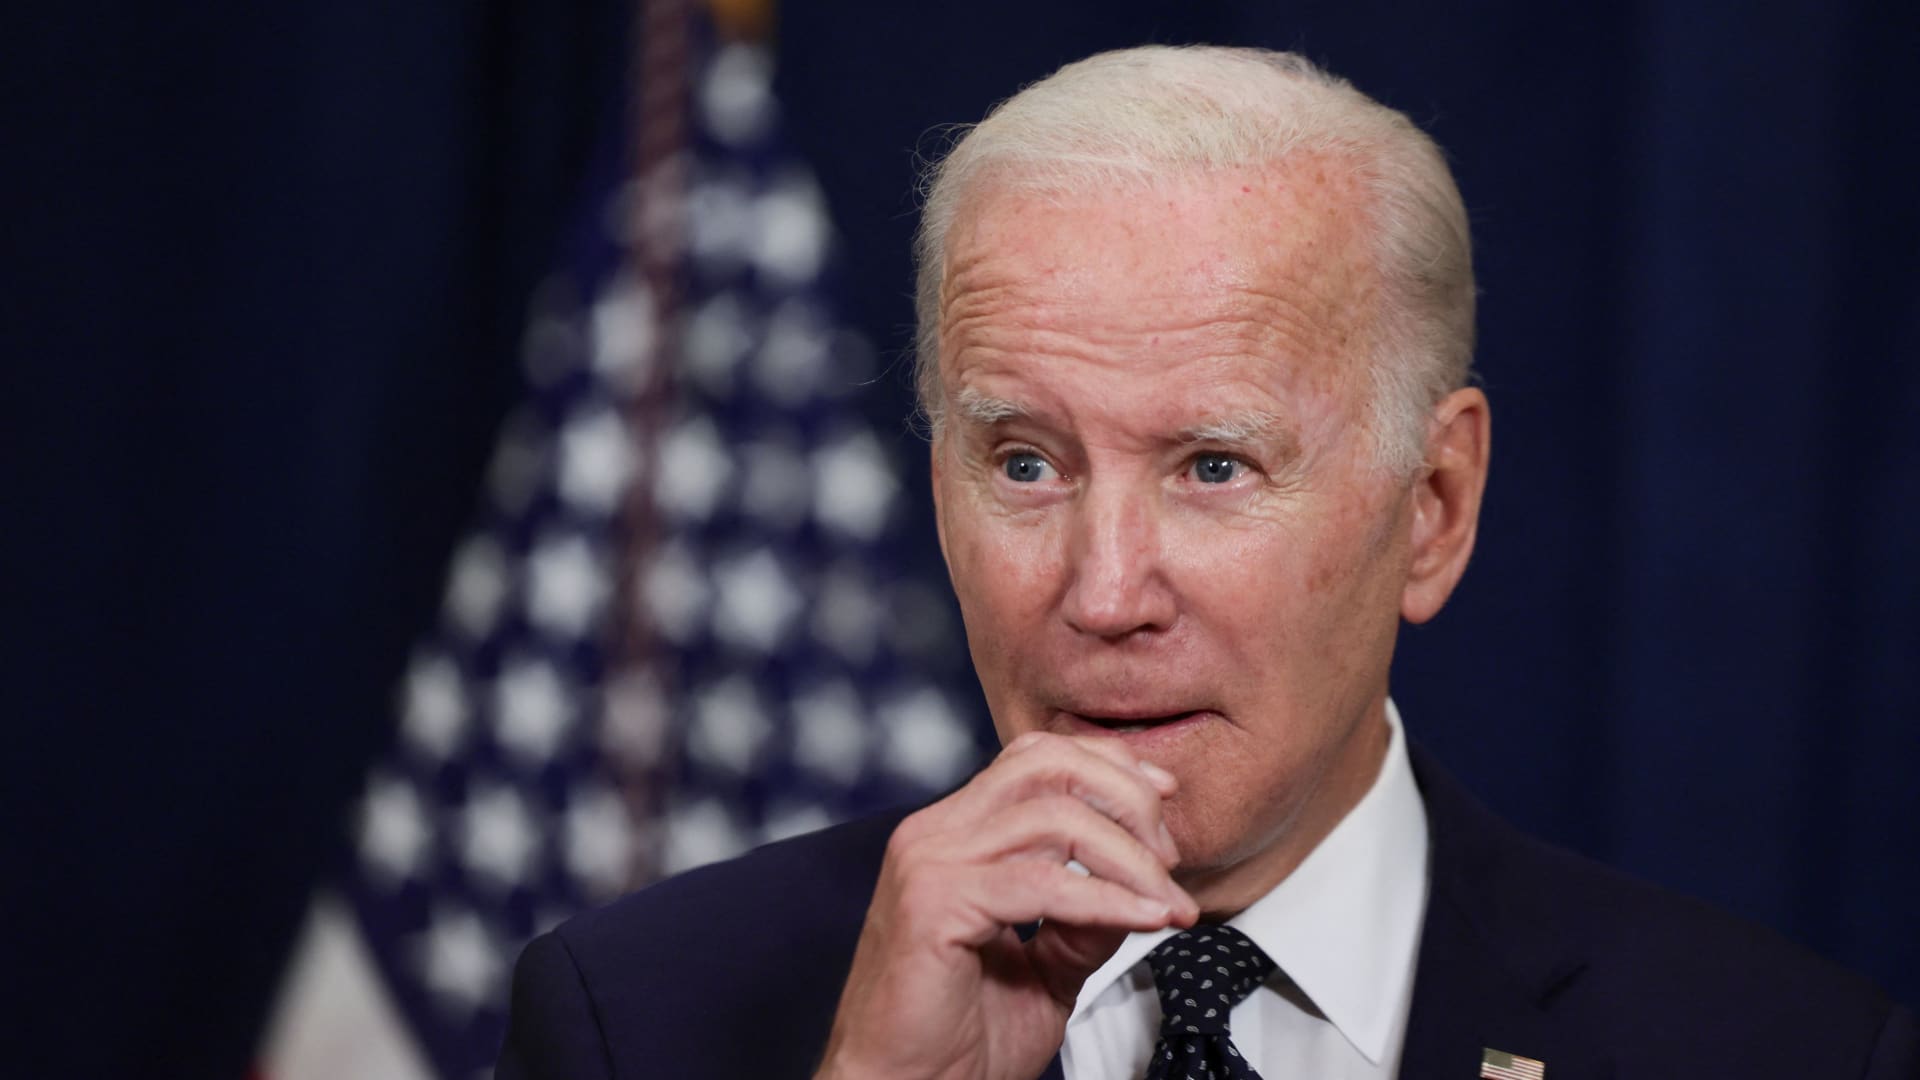 Biden classified documents: White House won't say why it didn't disclose earlier that records were found